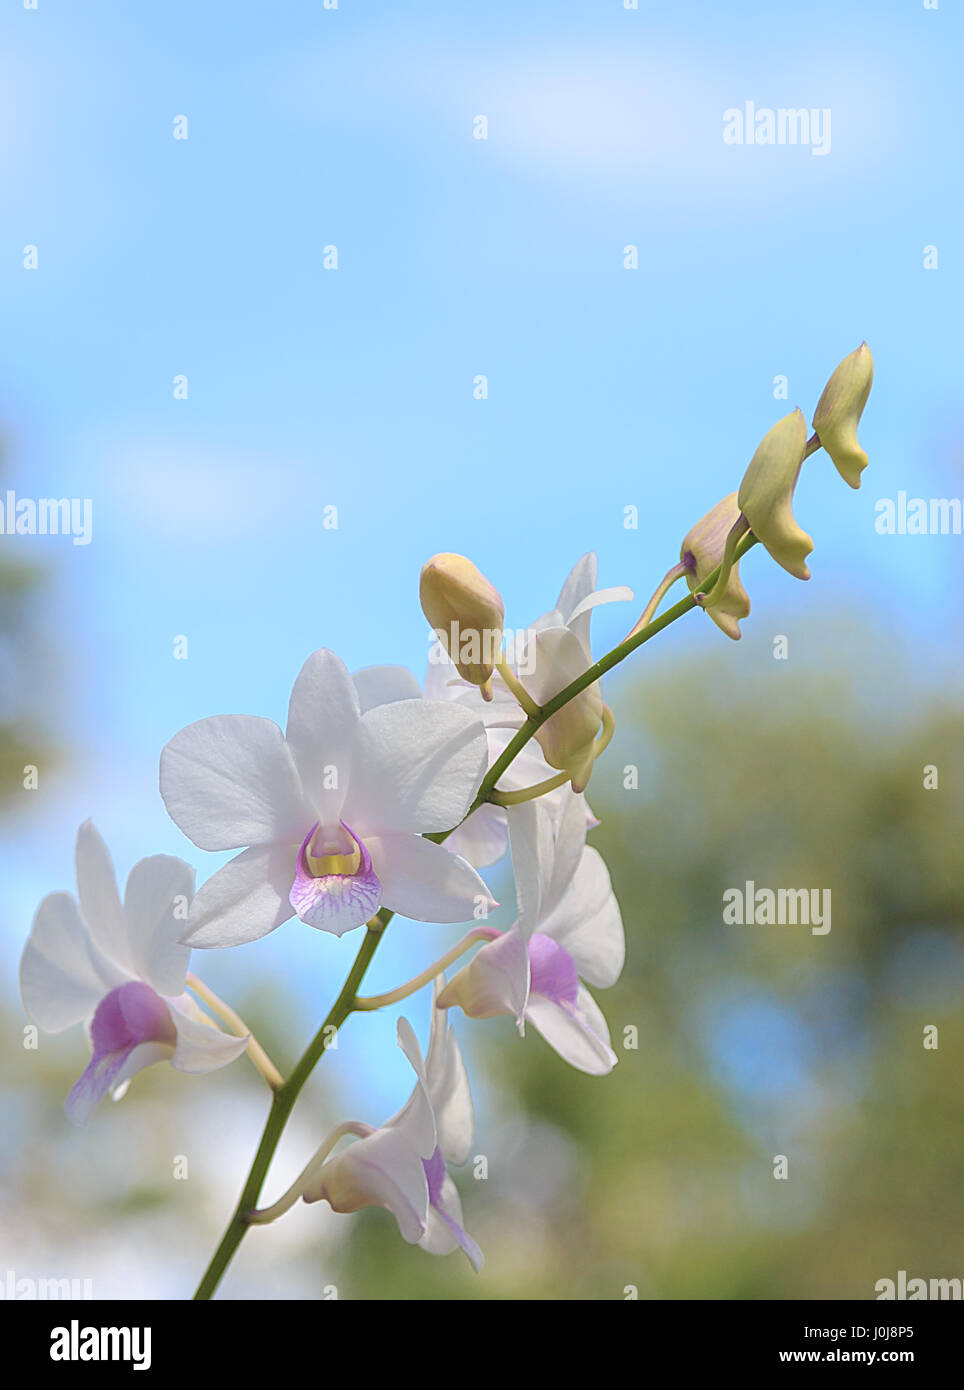 White orchid on blue sky and green leaf background Stock Photo